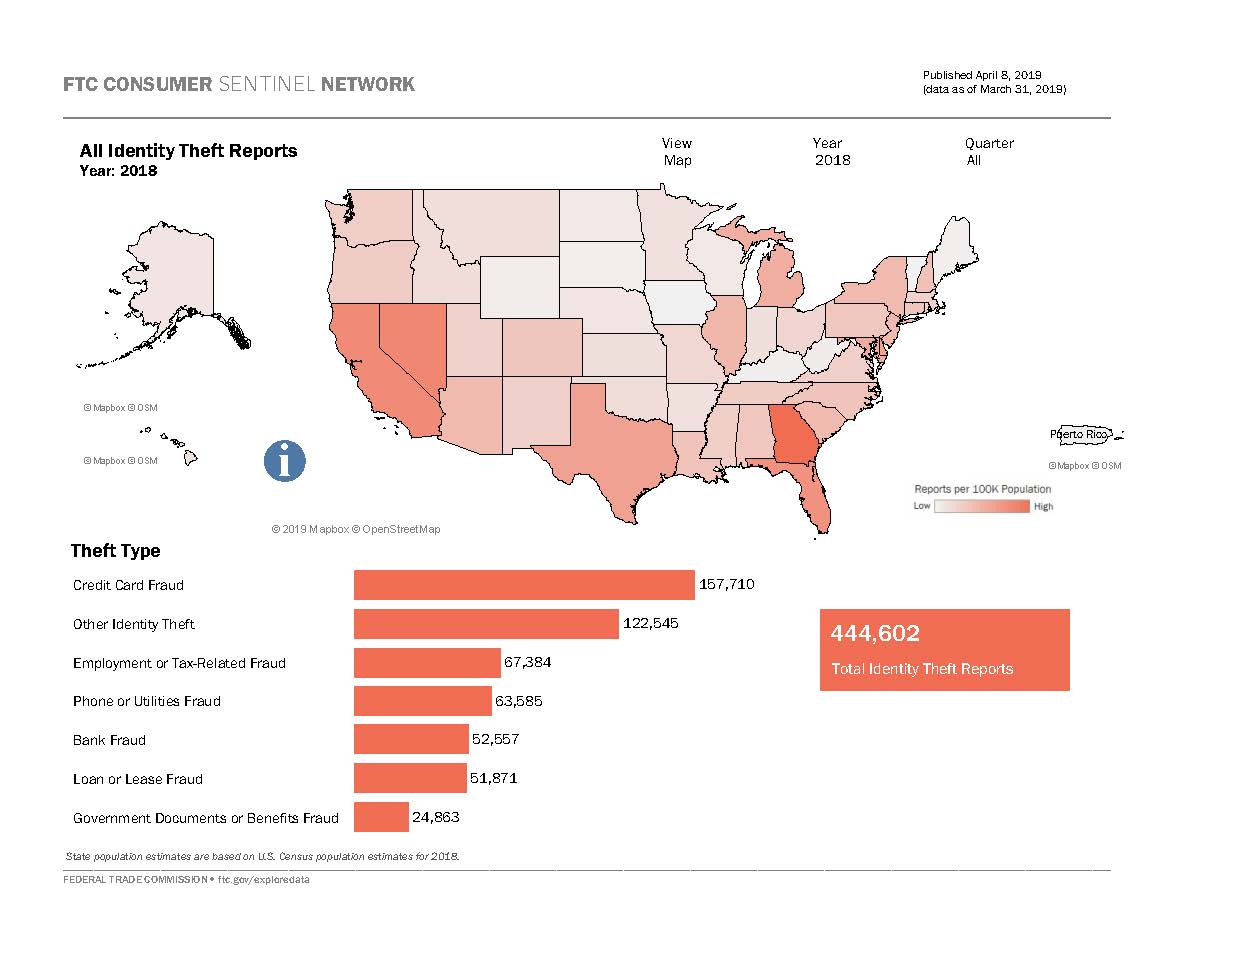 Link to interactive U.S. map and other visualizations showing id theft data by state based on consumer reports.